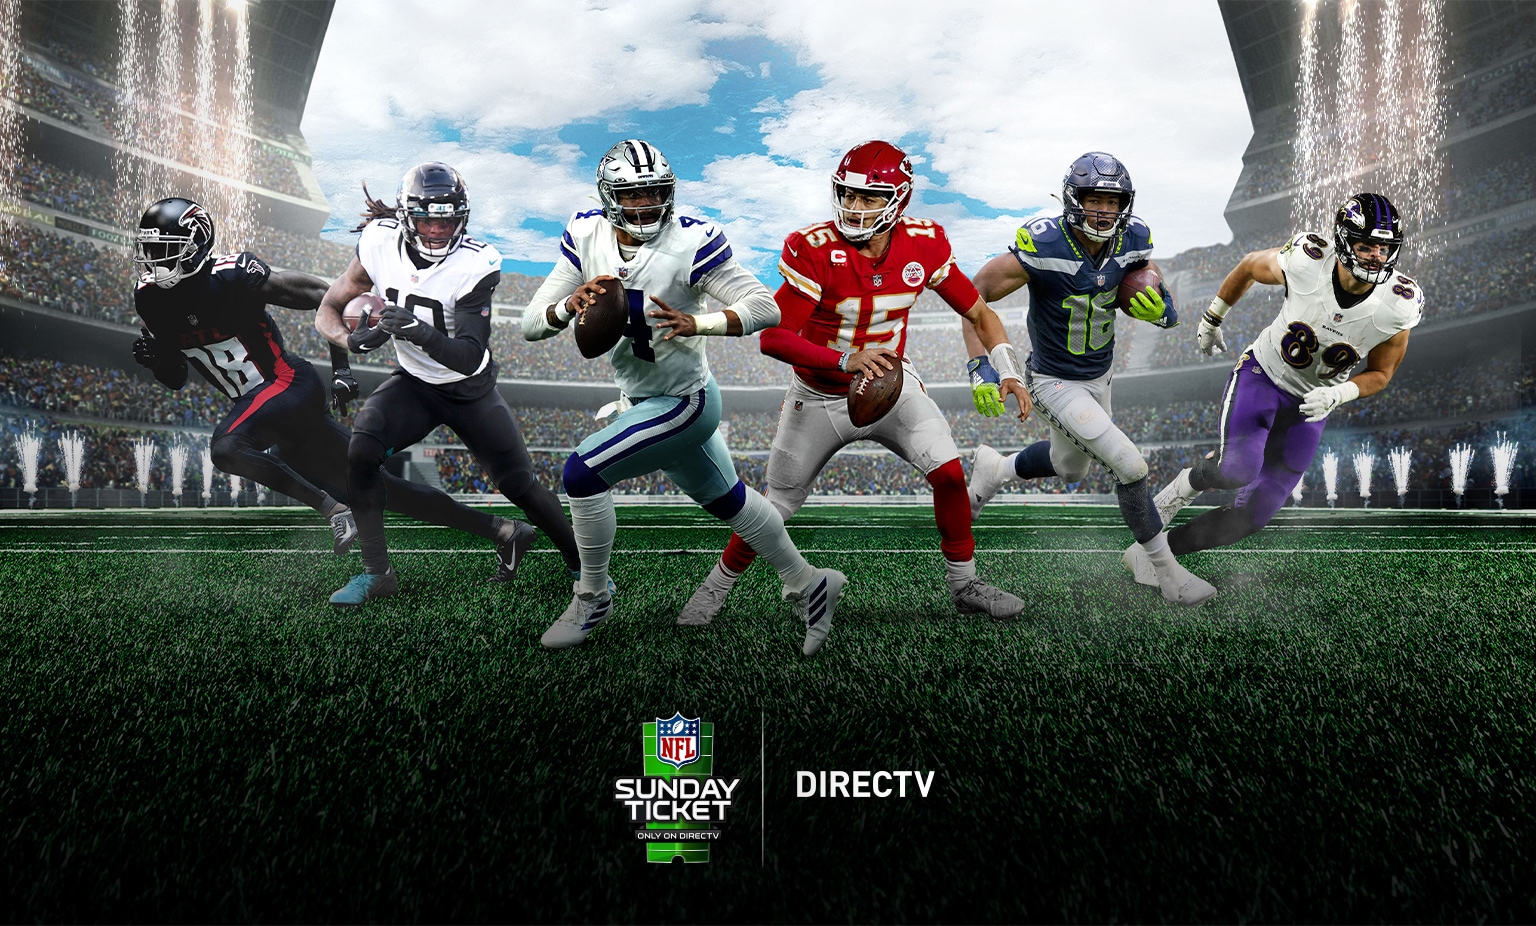 Apple TV is the Leader to Secure the NFL Sunday Ticket